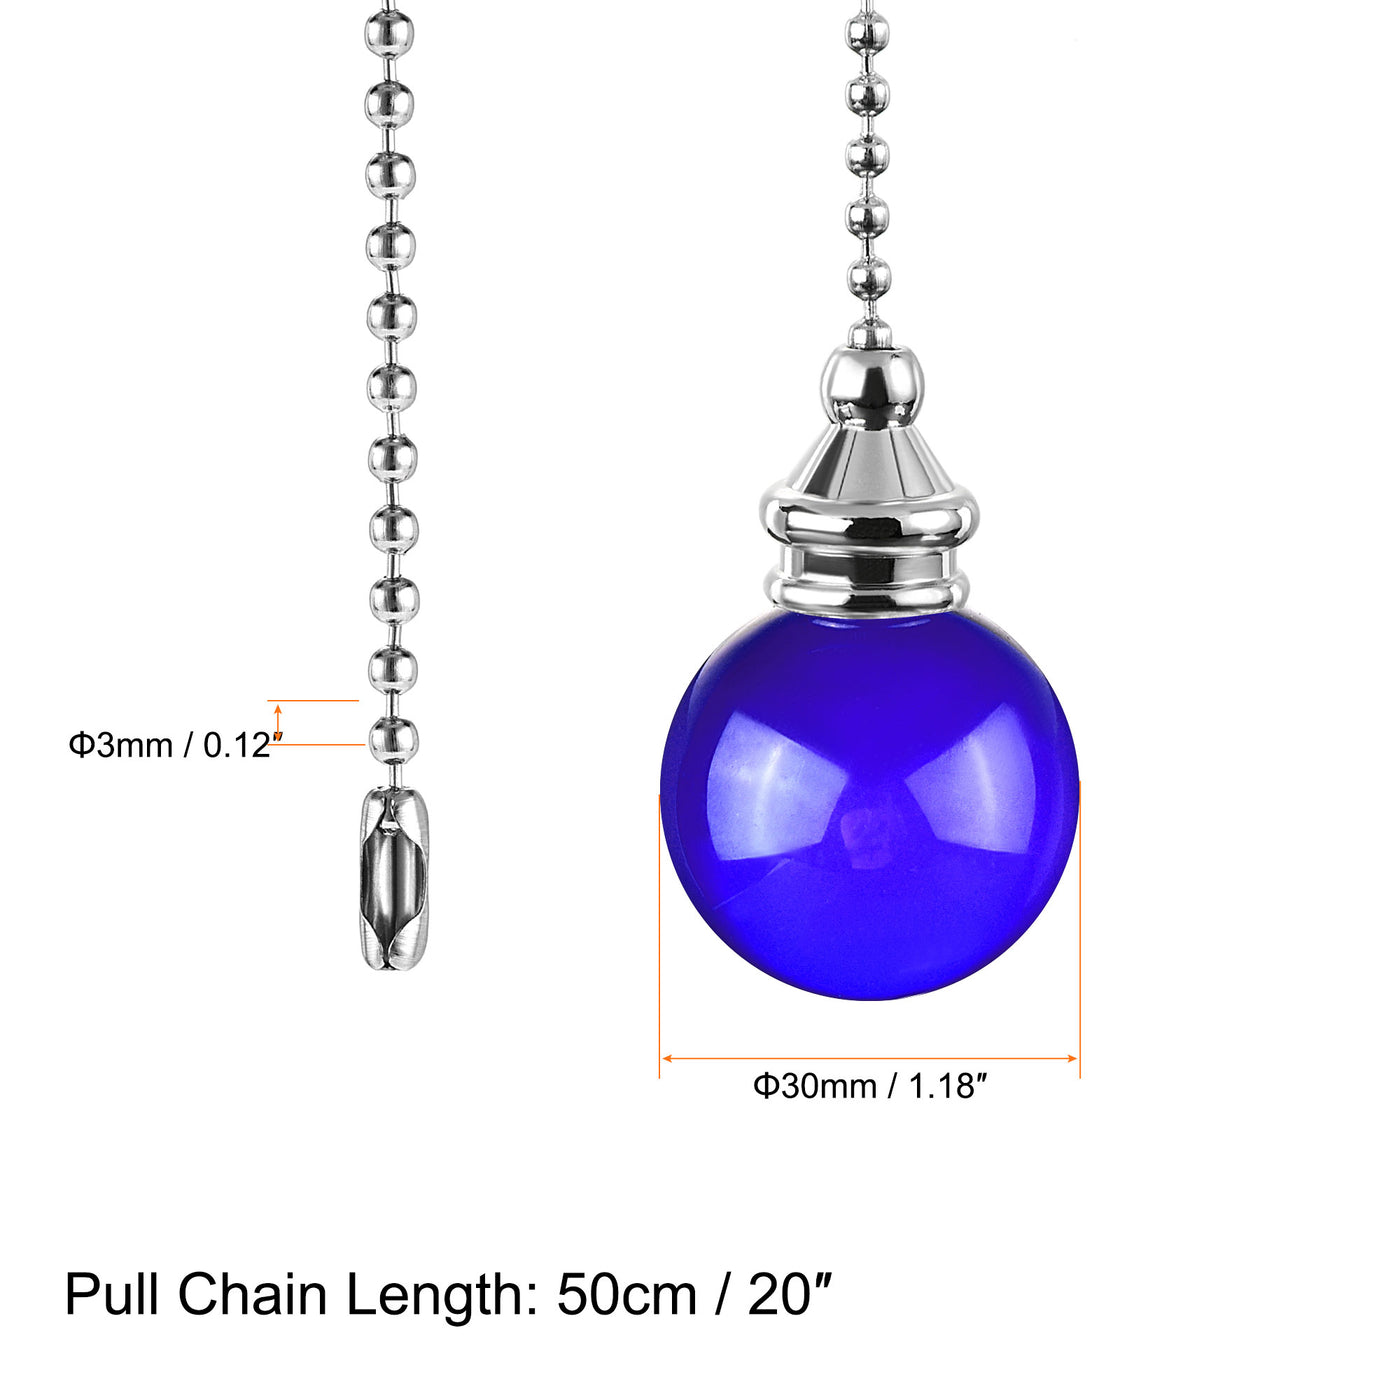 uxcell Uxcell Ceiling Fan Pull Chain, 20 Inch Fan Pull Chain Ornament Extension Lighting Accessories, 30mm Crystal Ball Pendant, Blue